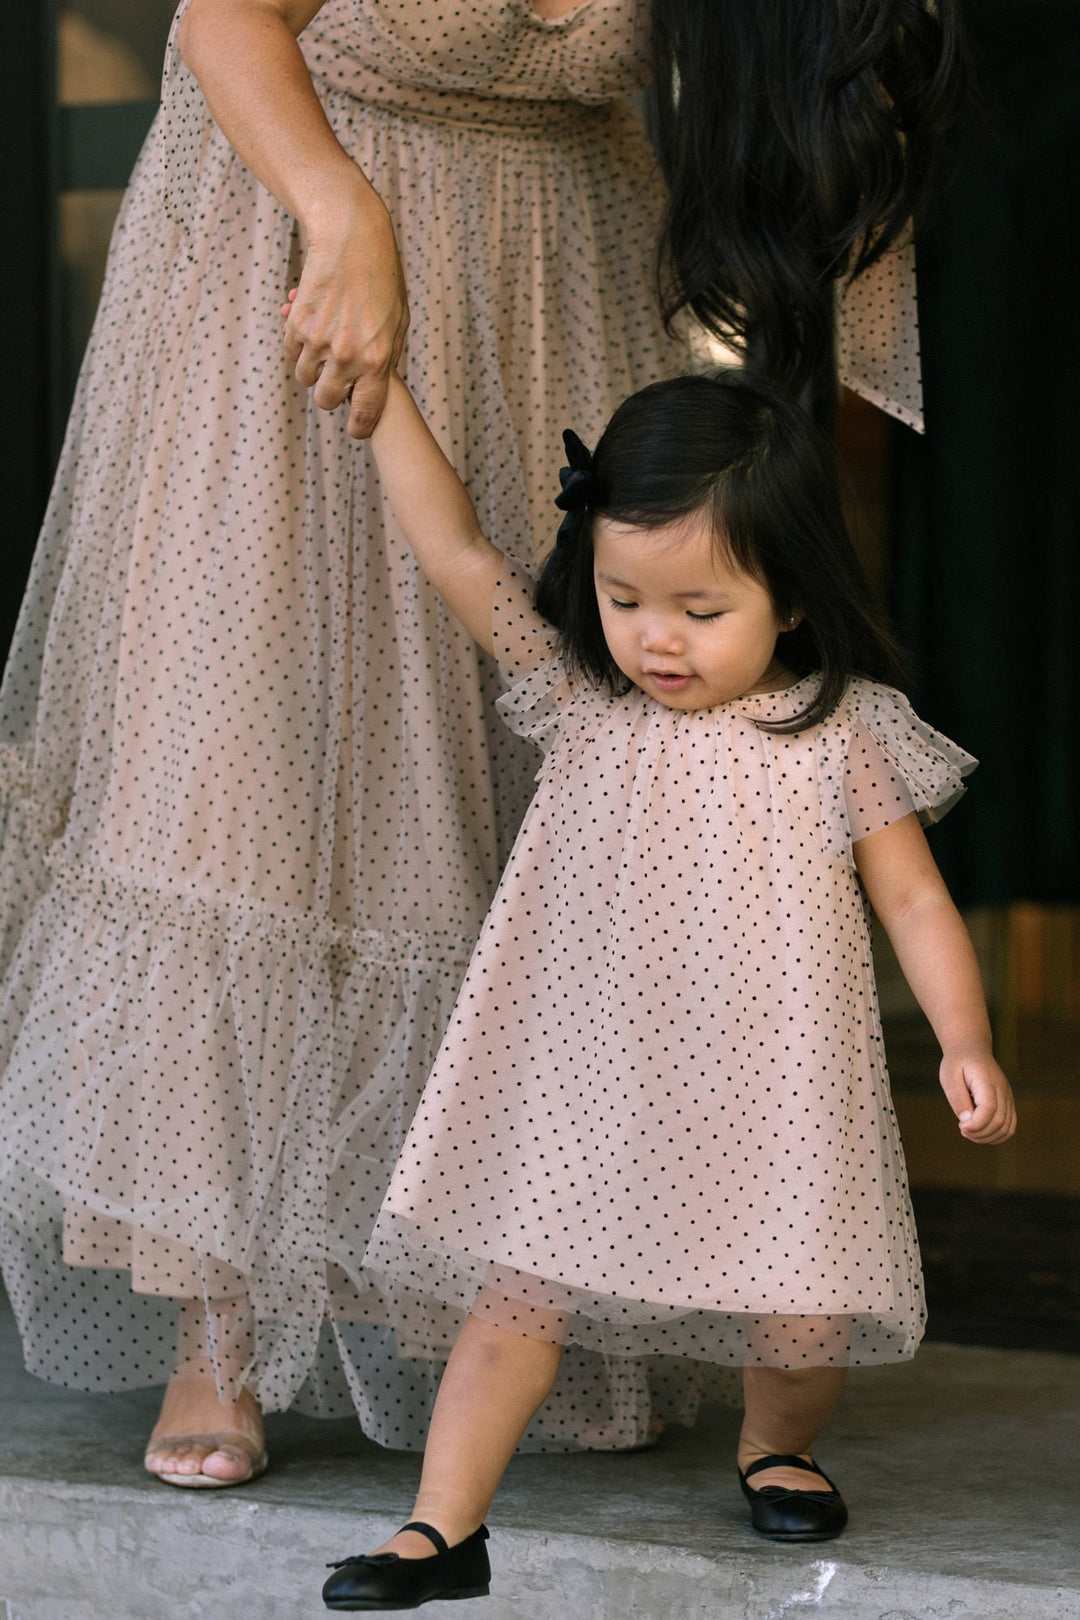 Tina Dotted Tulle Dress - Morning Lavender Boutique Dresses